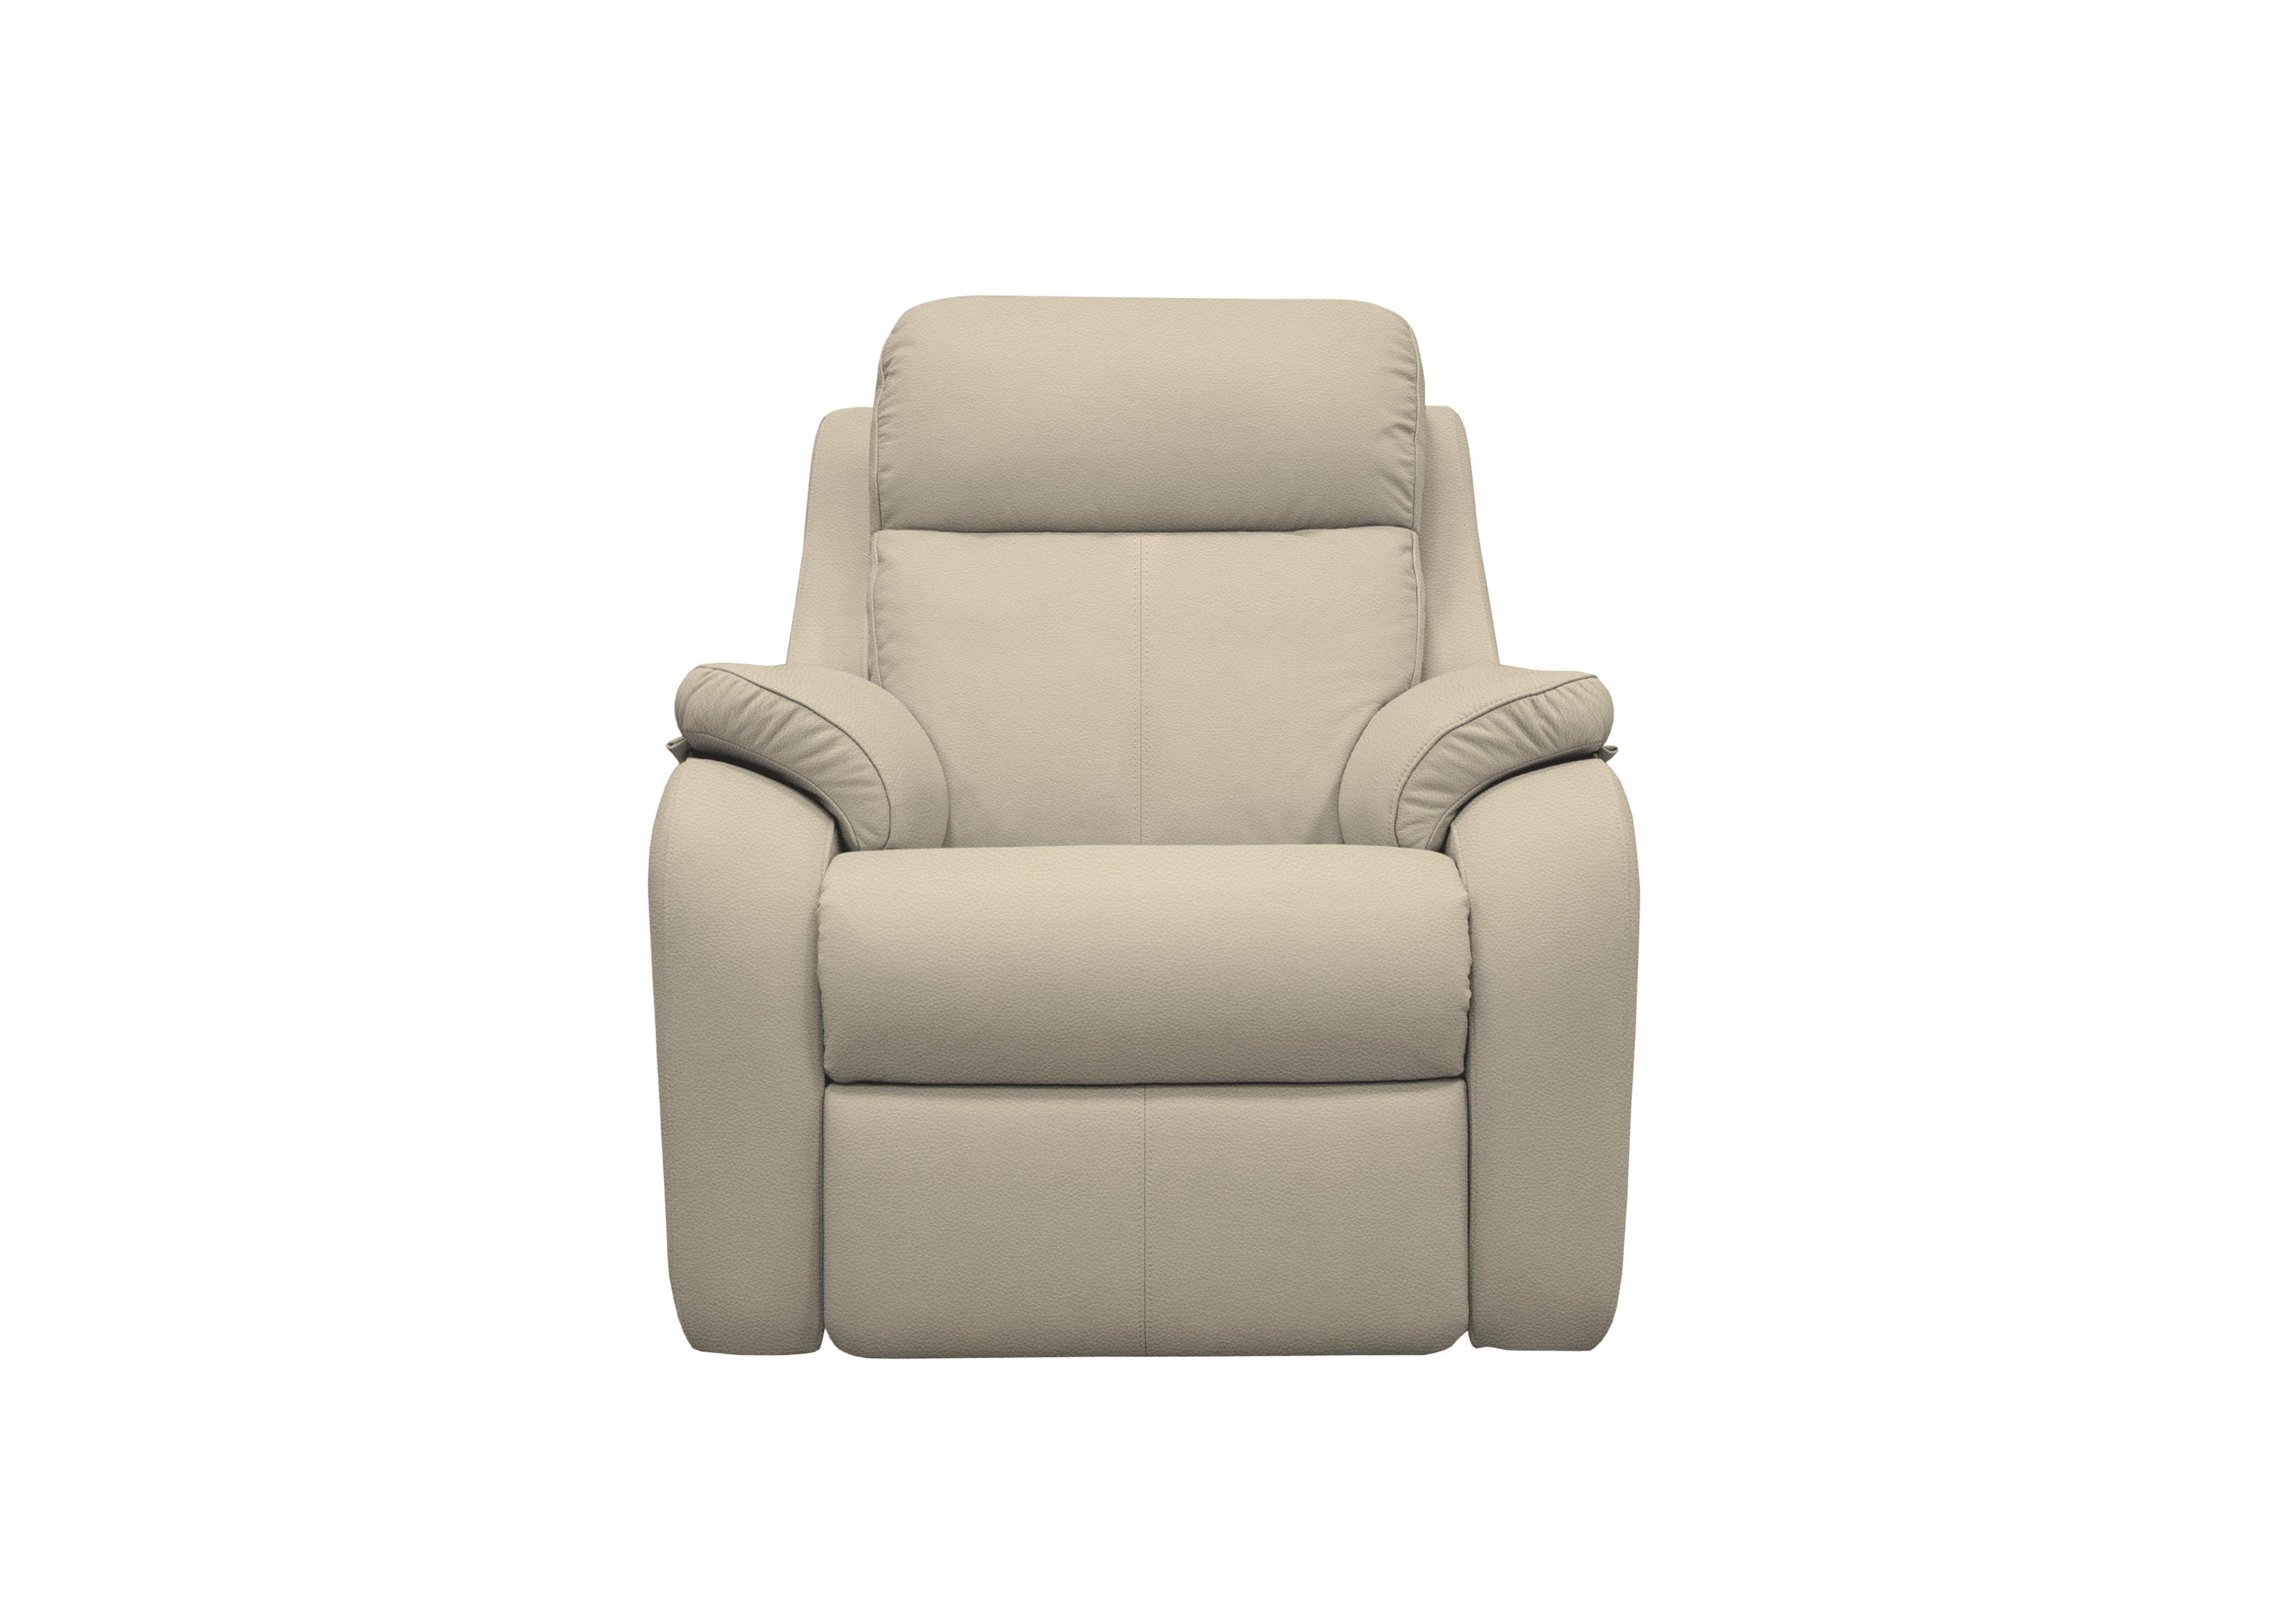 Kingsbury Leather Power Recliner Armchair with Power Headrests in H001 Oxford Mushroom on Furniture Village